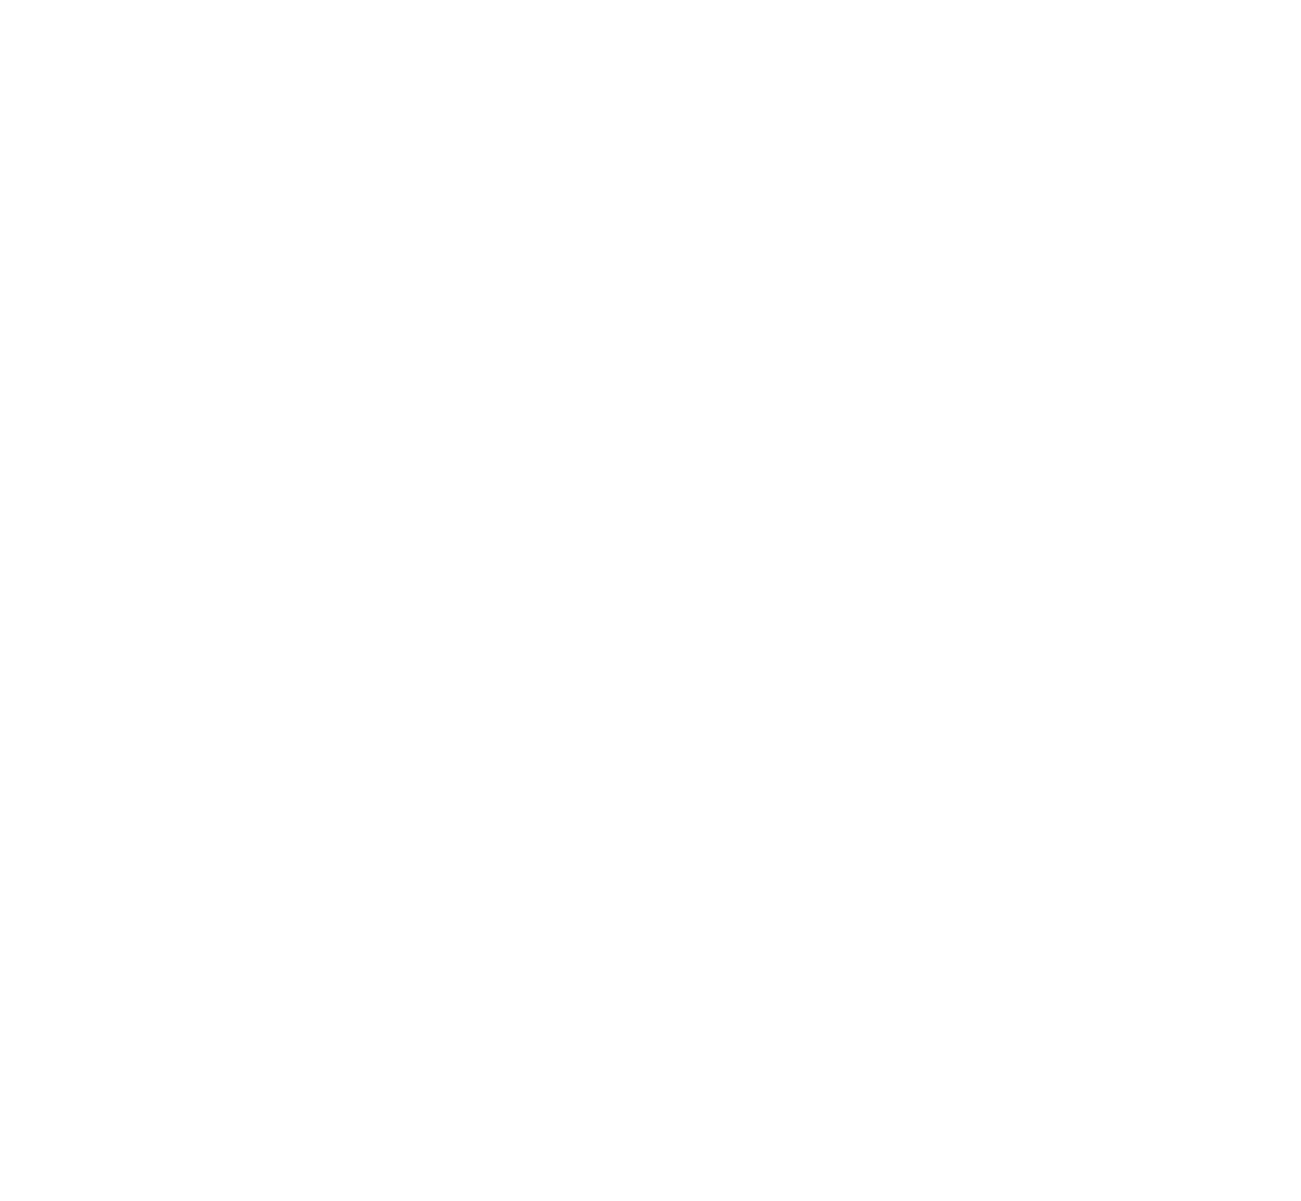 Kelly Financial Services